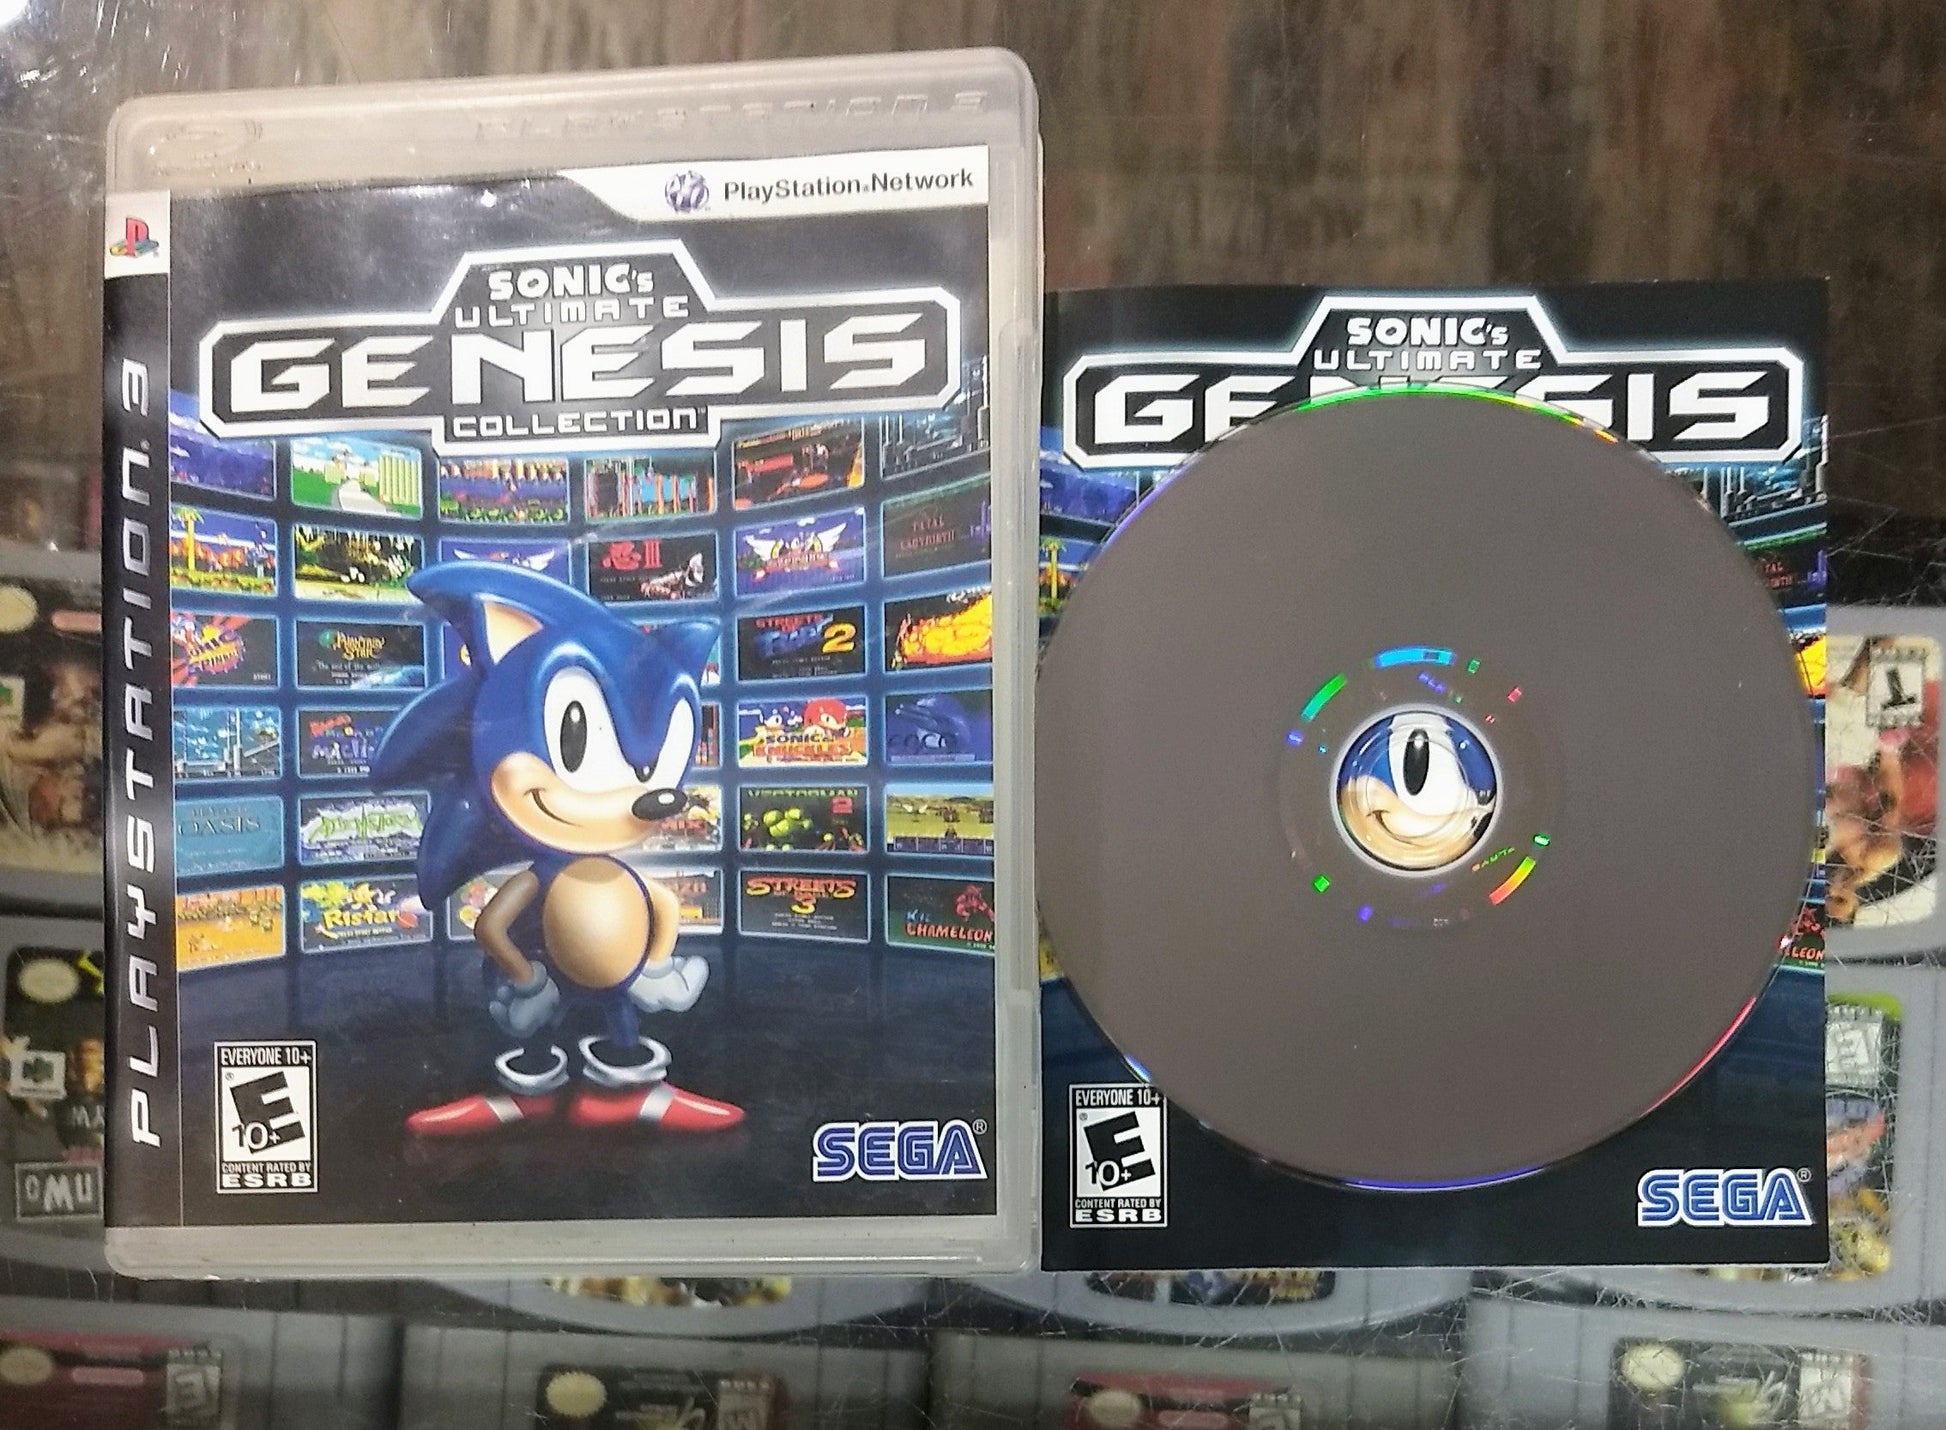 SONIC'S ULTIMATE GENESIS COLLECTION (PLAYSTATION 3 PS3) - jeux video game-x